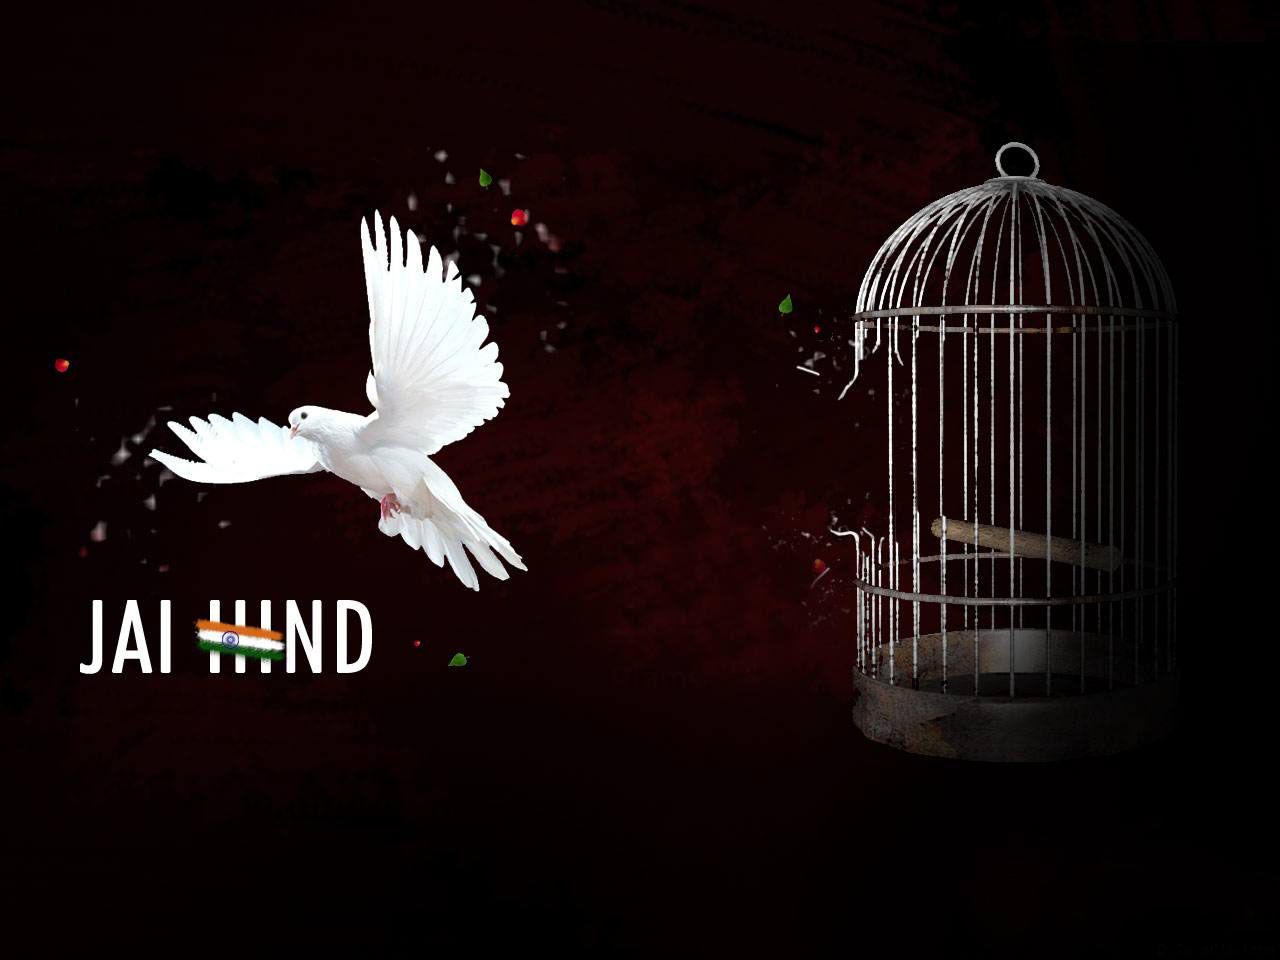 India Independence Day Freedom - 1280x960 Wallpaper 